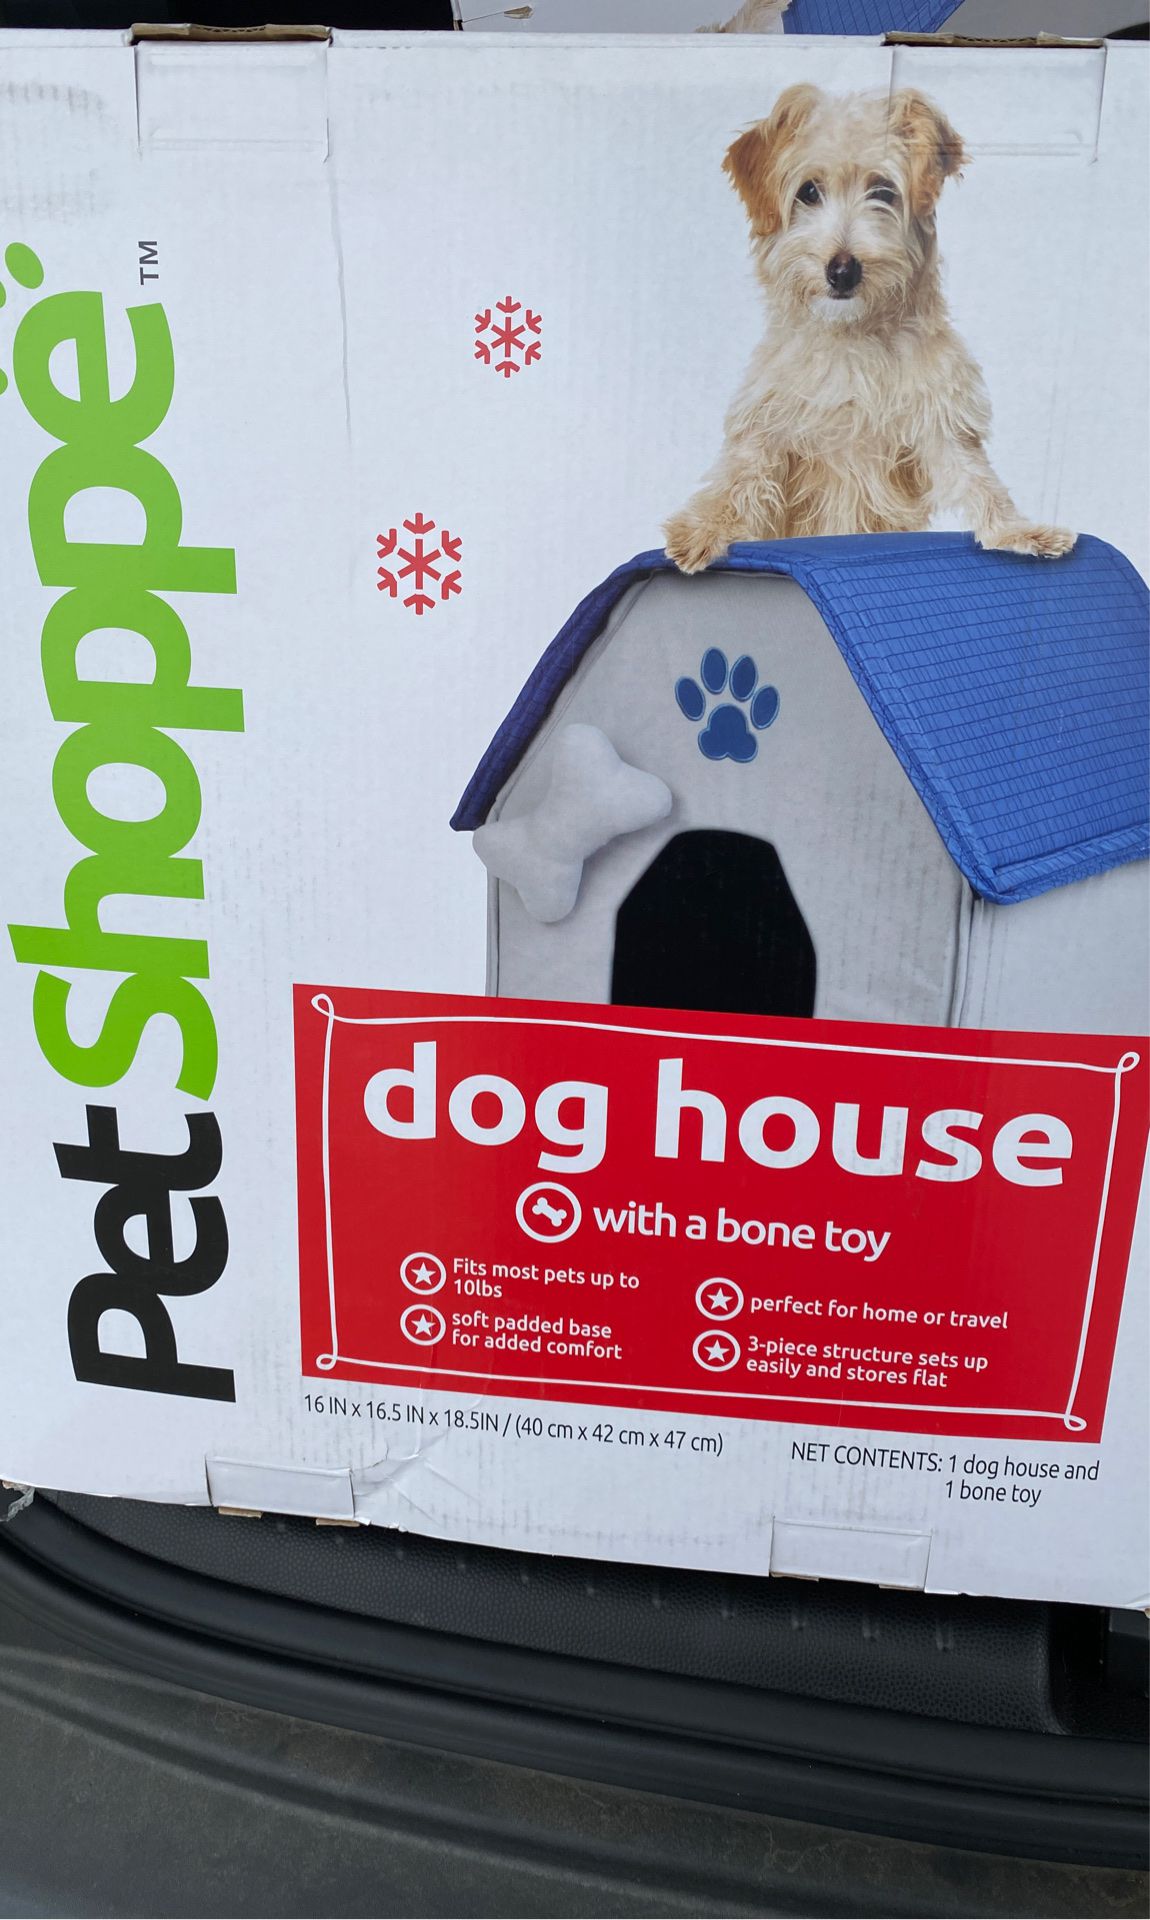 Dog or cat house